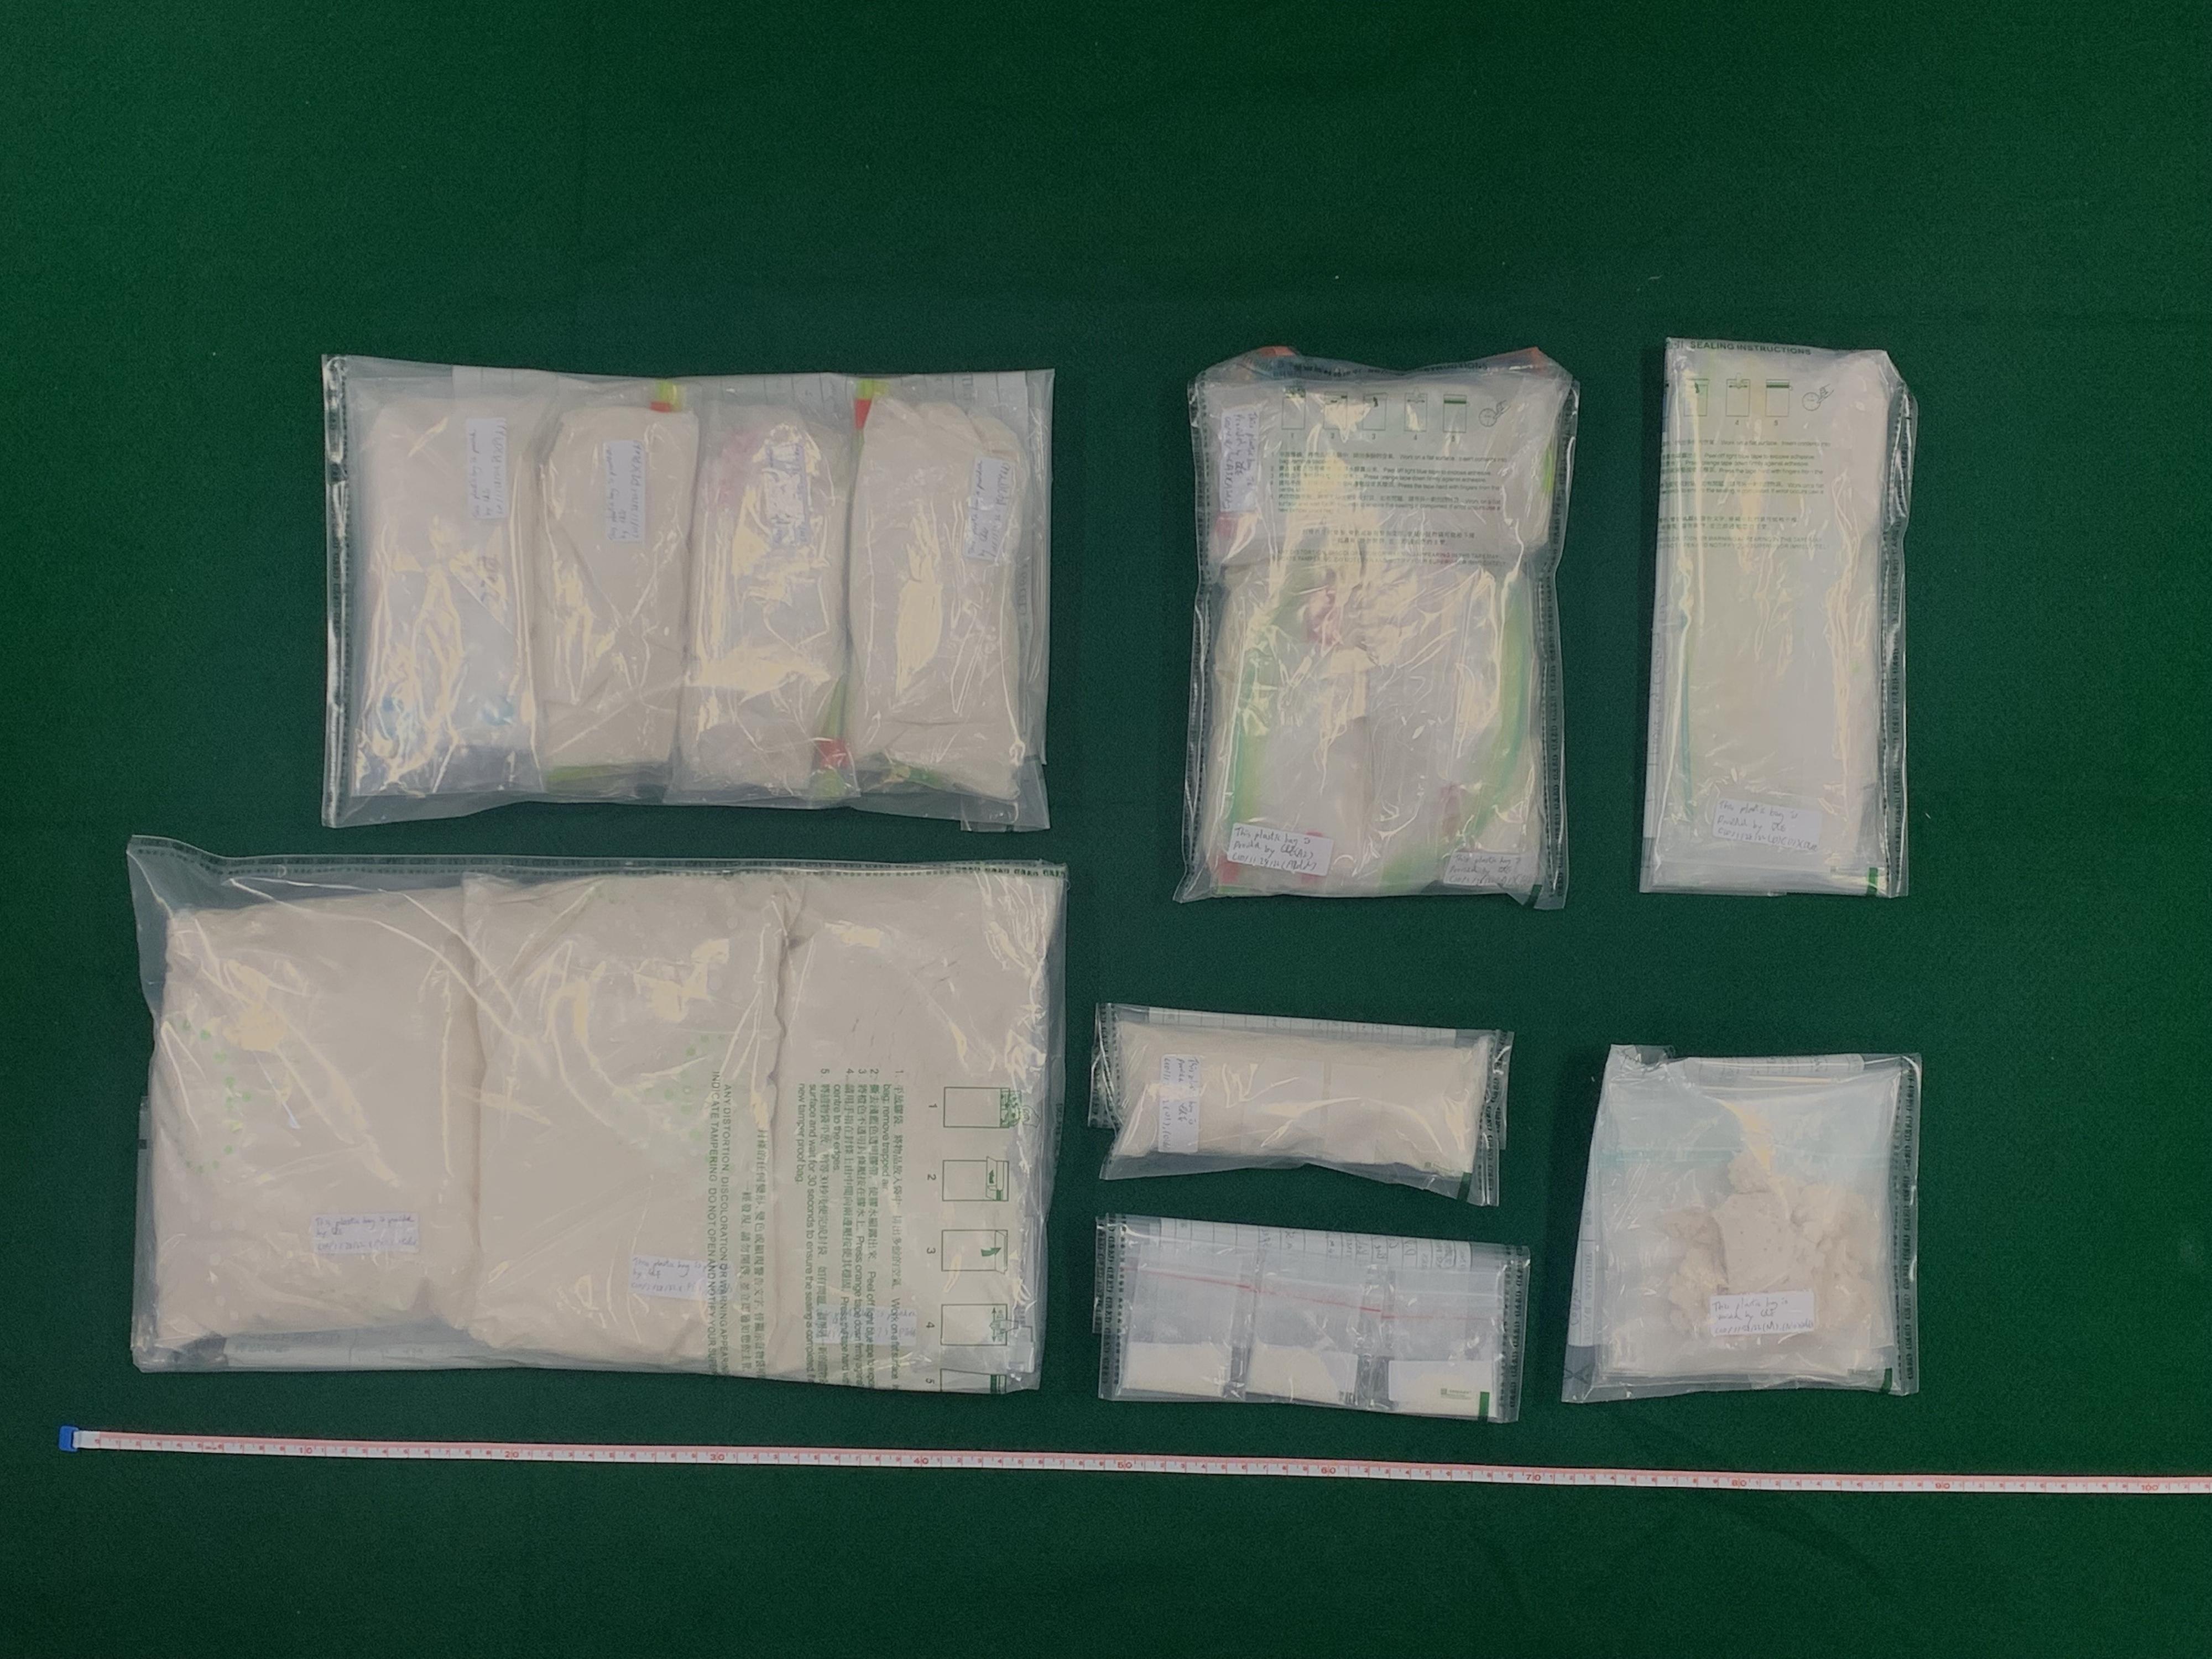 Hong Kong Customs yesterday (September 23) seized about 4.5 kilograms of suspected ketamine, about 150 grams of suspected cocaine and about 90 grams of suspected crack cocaine with a total estimated market value of about $2.7 million in Cheung Sha Wan. Two men and a woman, aged between 22 and 26 years old, suspected to be connected with the case were arrested. Photo shows the suspected drugs seized.